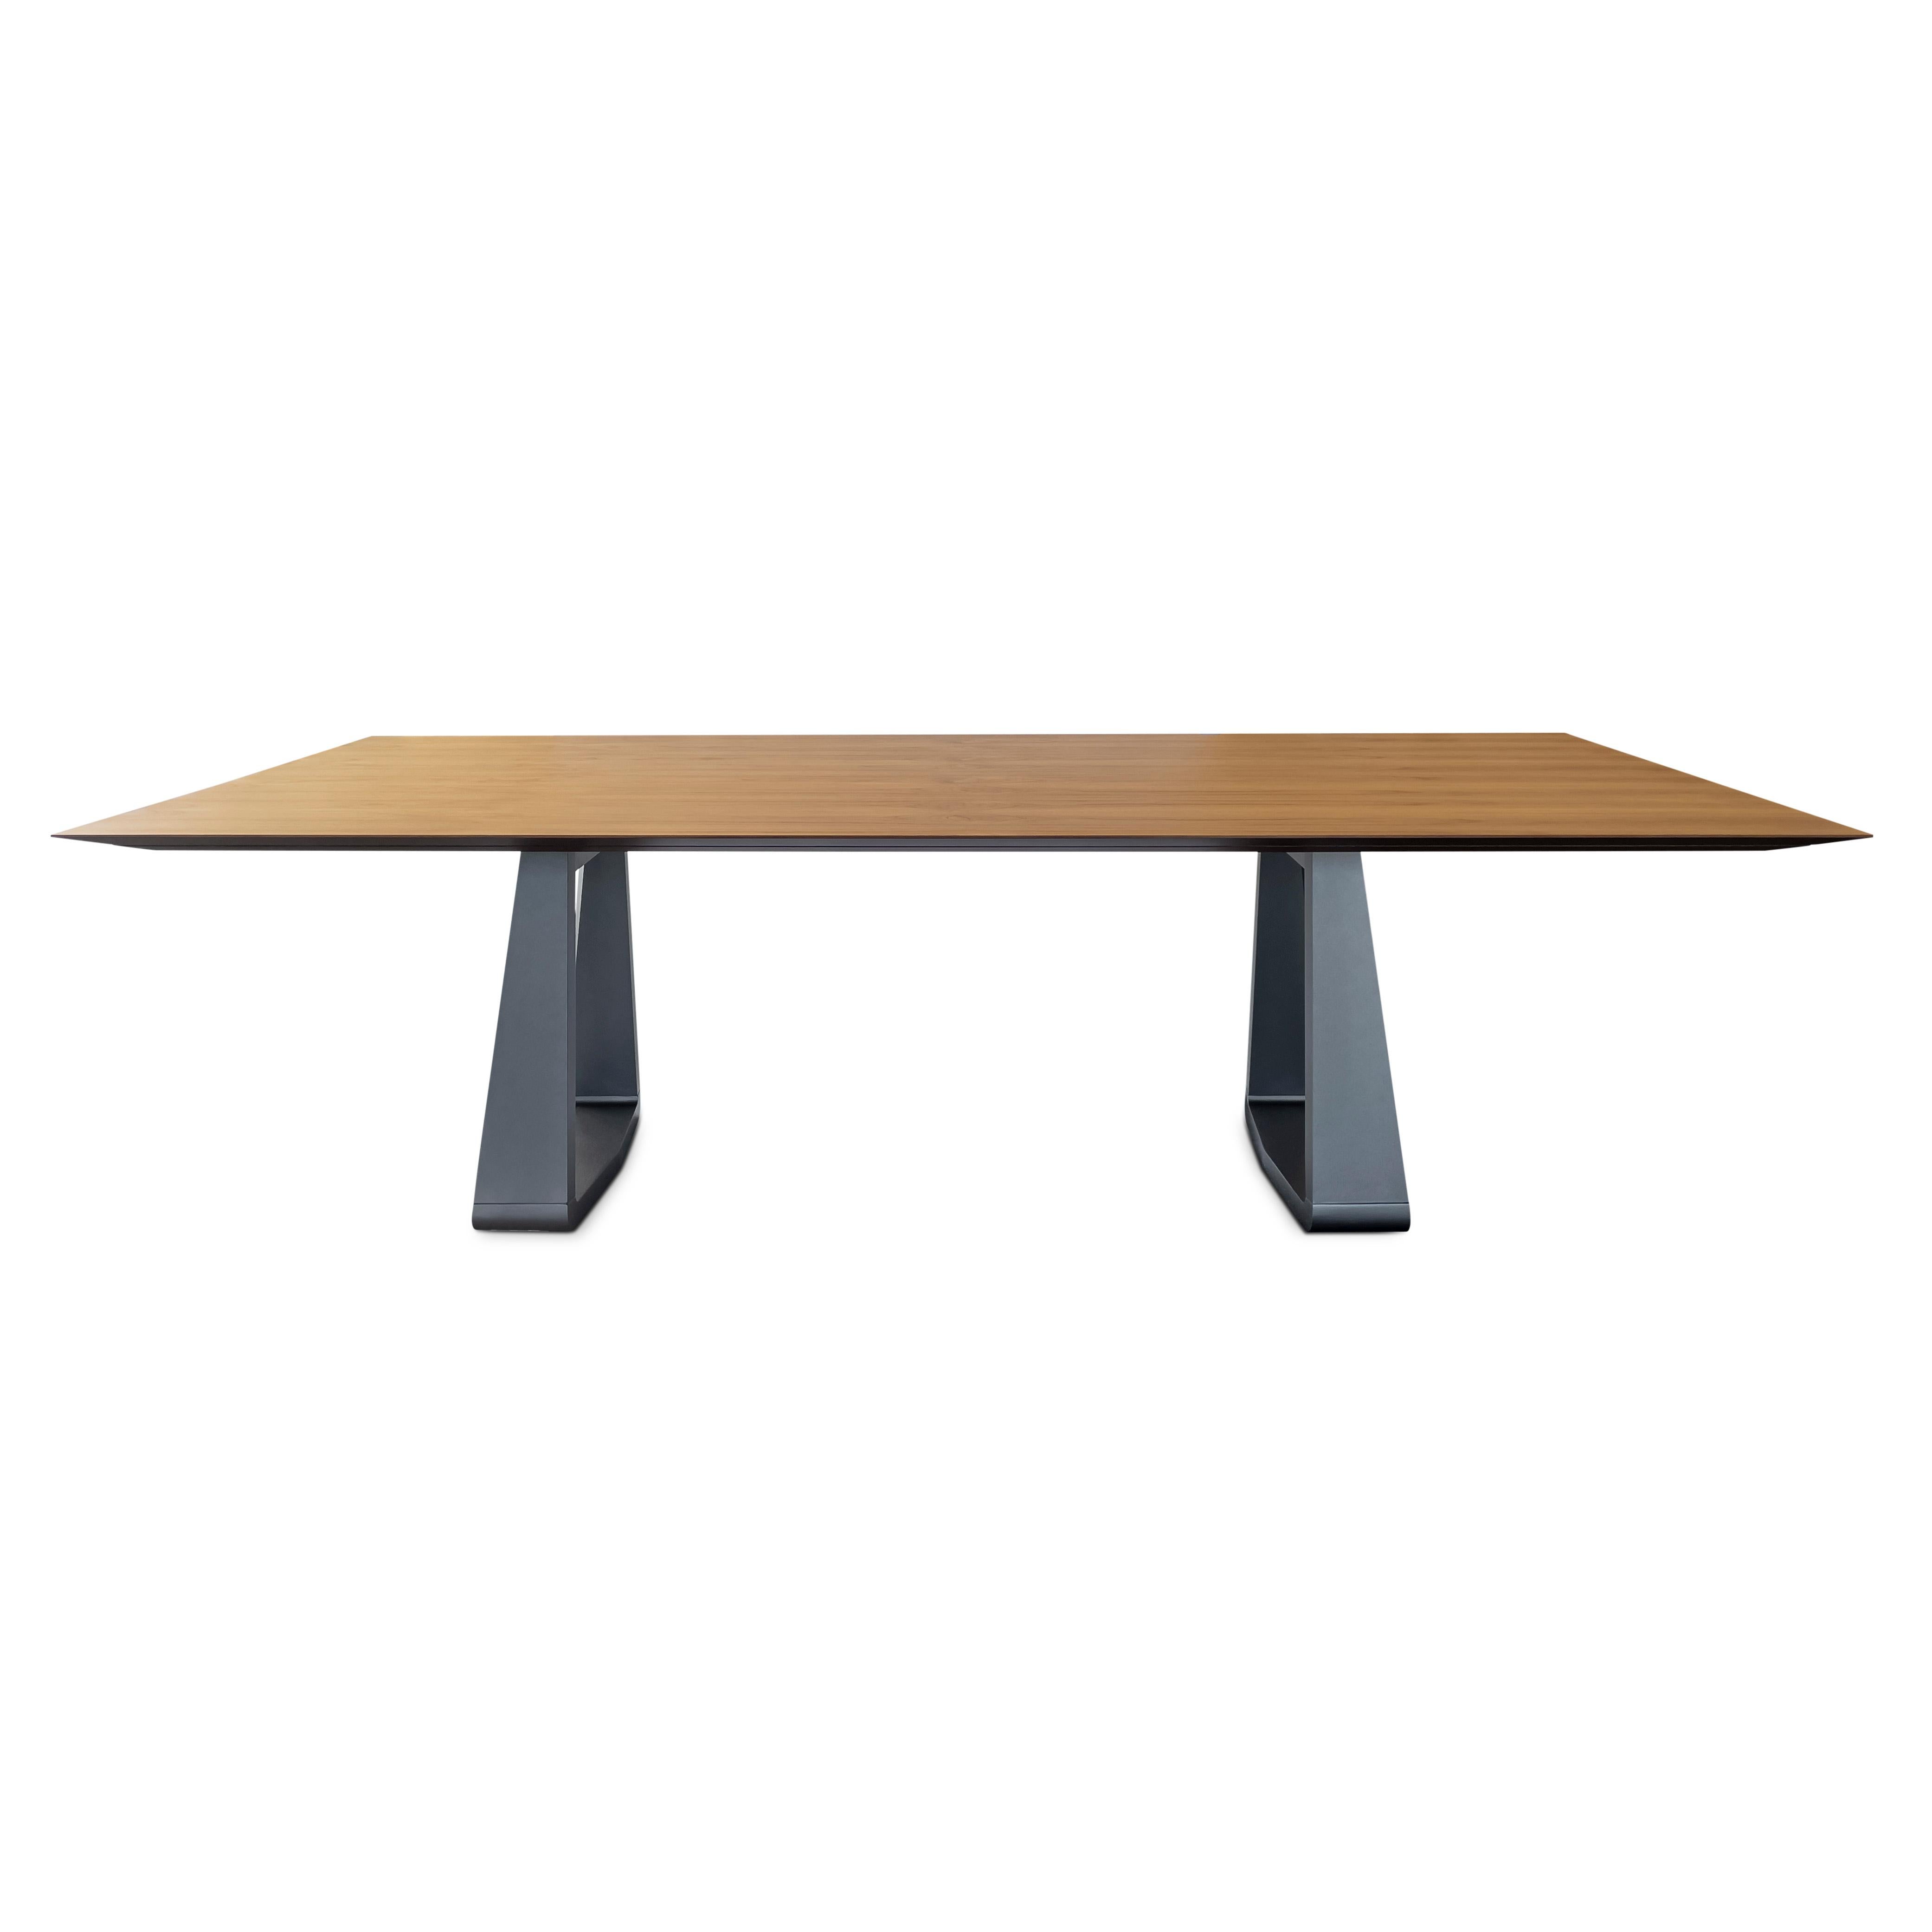 The Wing dining table is a beautiful chamfered piece in a teak veneered table top and a minimalist graphite-painted base. Combining all these details the amazing Uultis team has created this dining table for any type of decor at your home because of